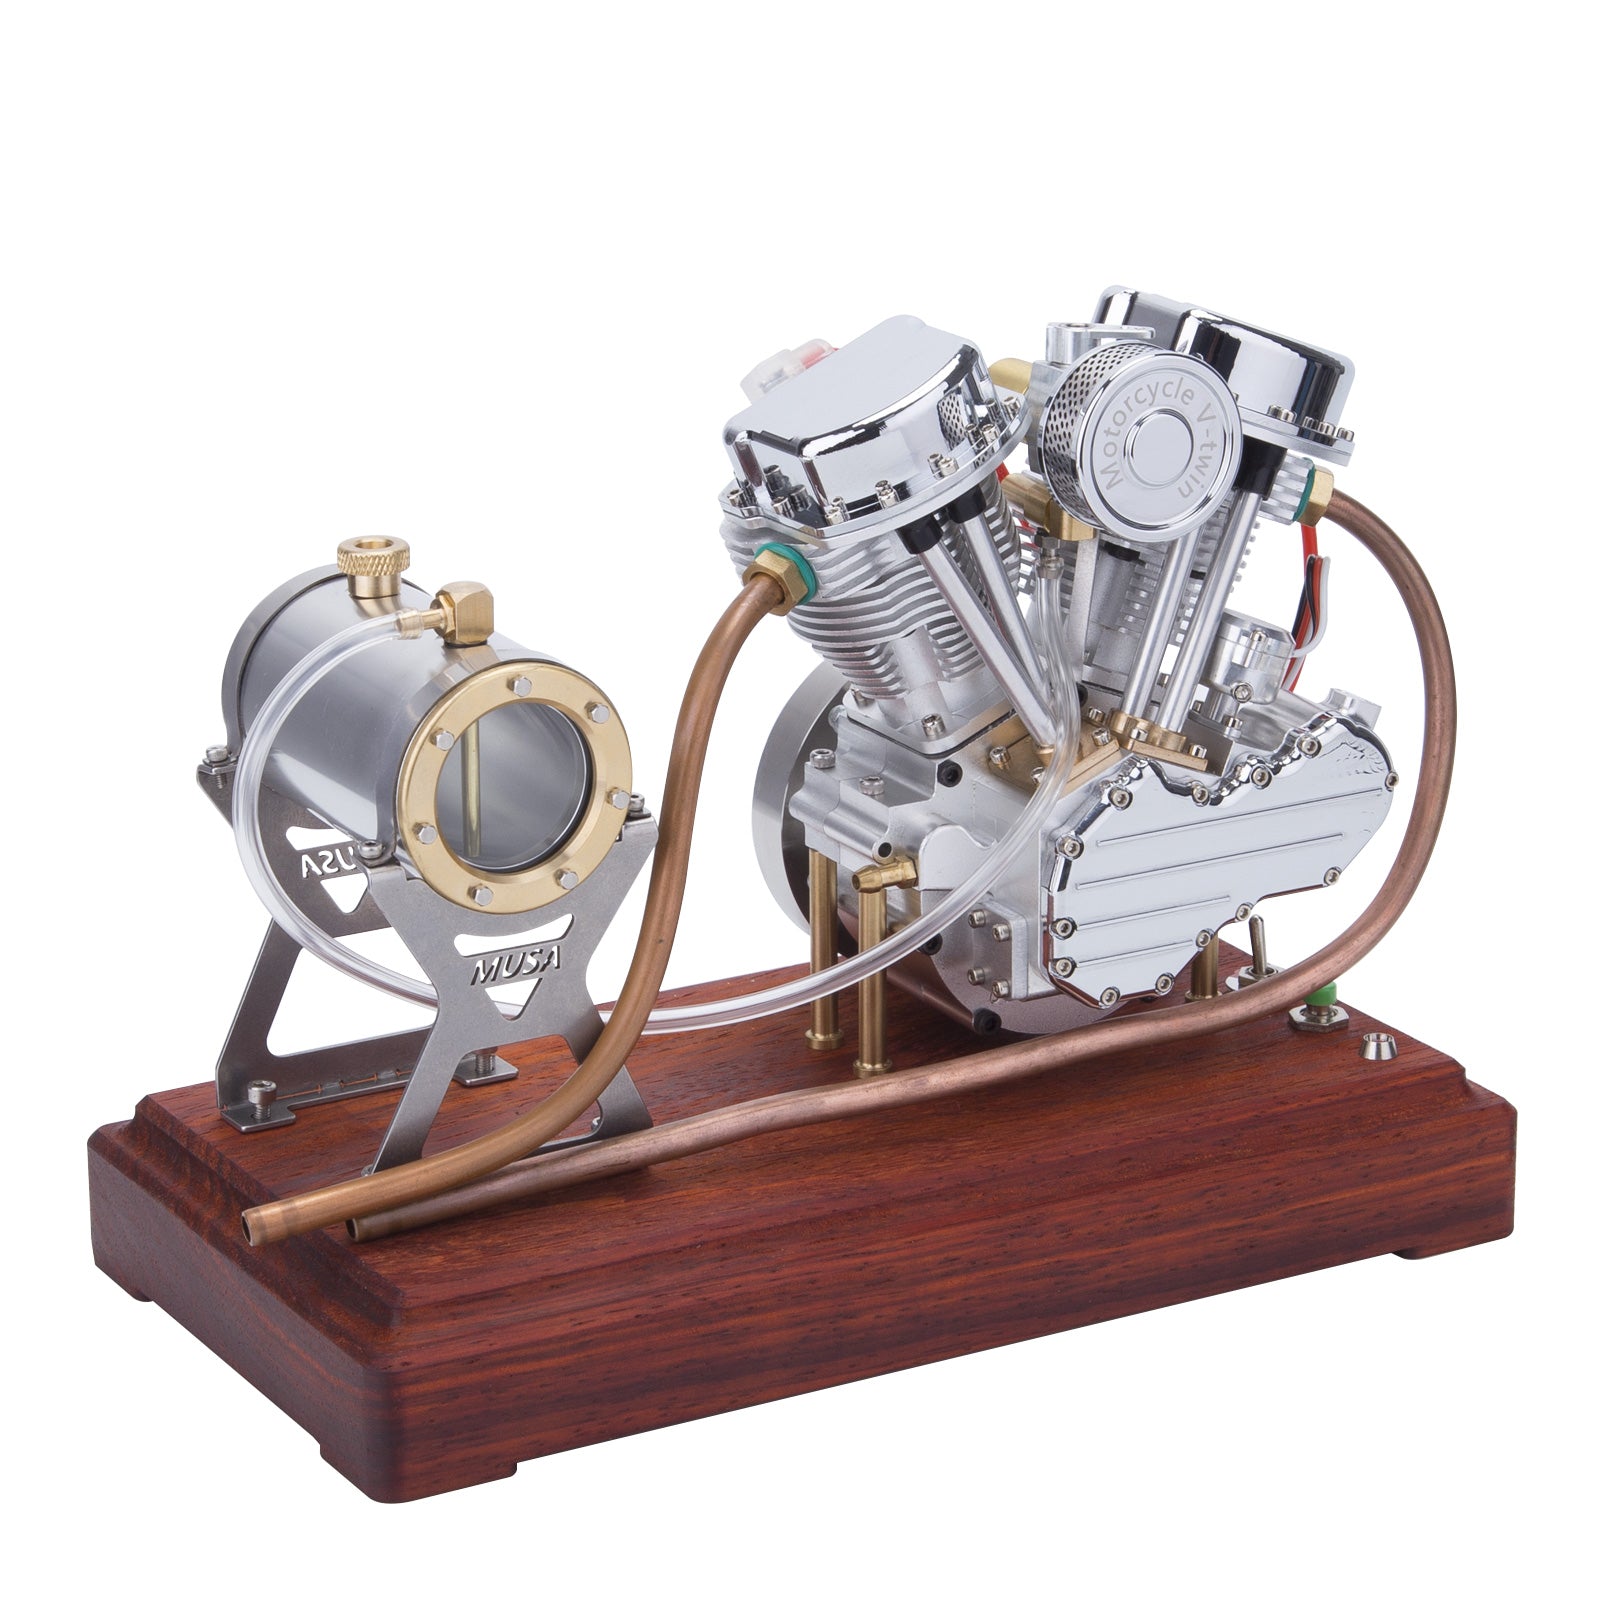 CISON FG-VT9 9cc V2 Engine and Original Parts V-twin 4-Stroke Air-cooled Motorcycle Engine